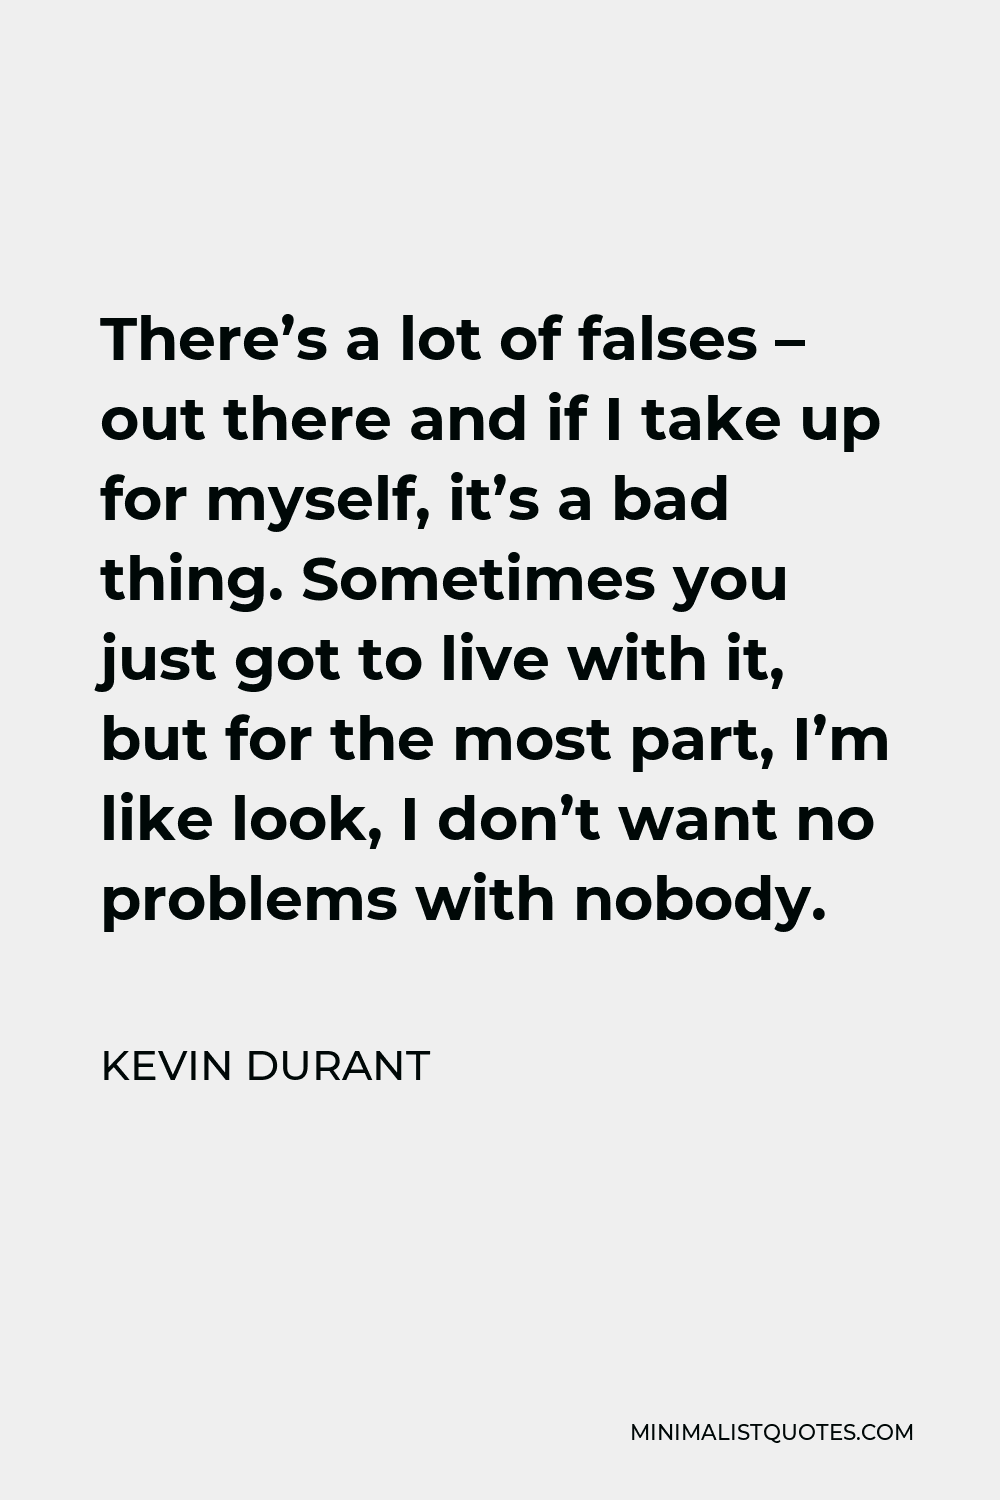 Kevin Durant Quote - There’s a lot of falses – out there and if I take up for myself, it’s a bad thing. Sometimes you just got to live with it, but for the most part, I’m like look, I don’t want no problems with nobody.